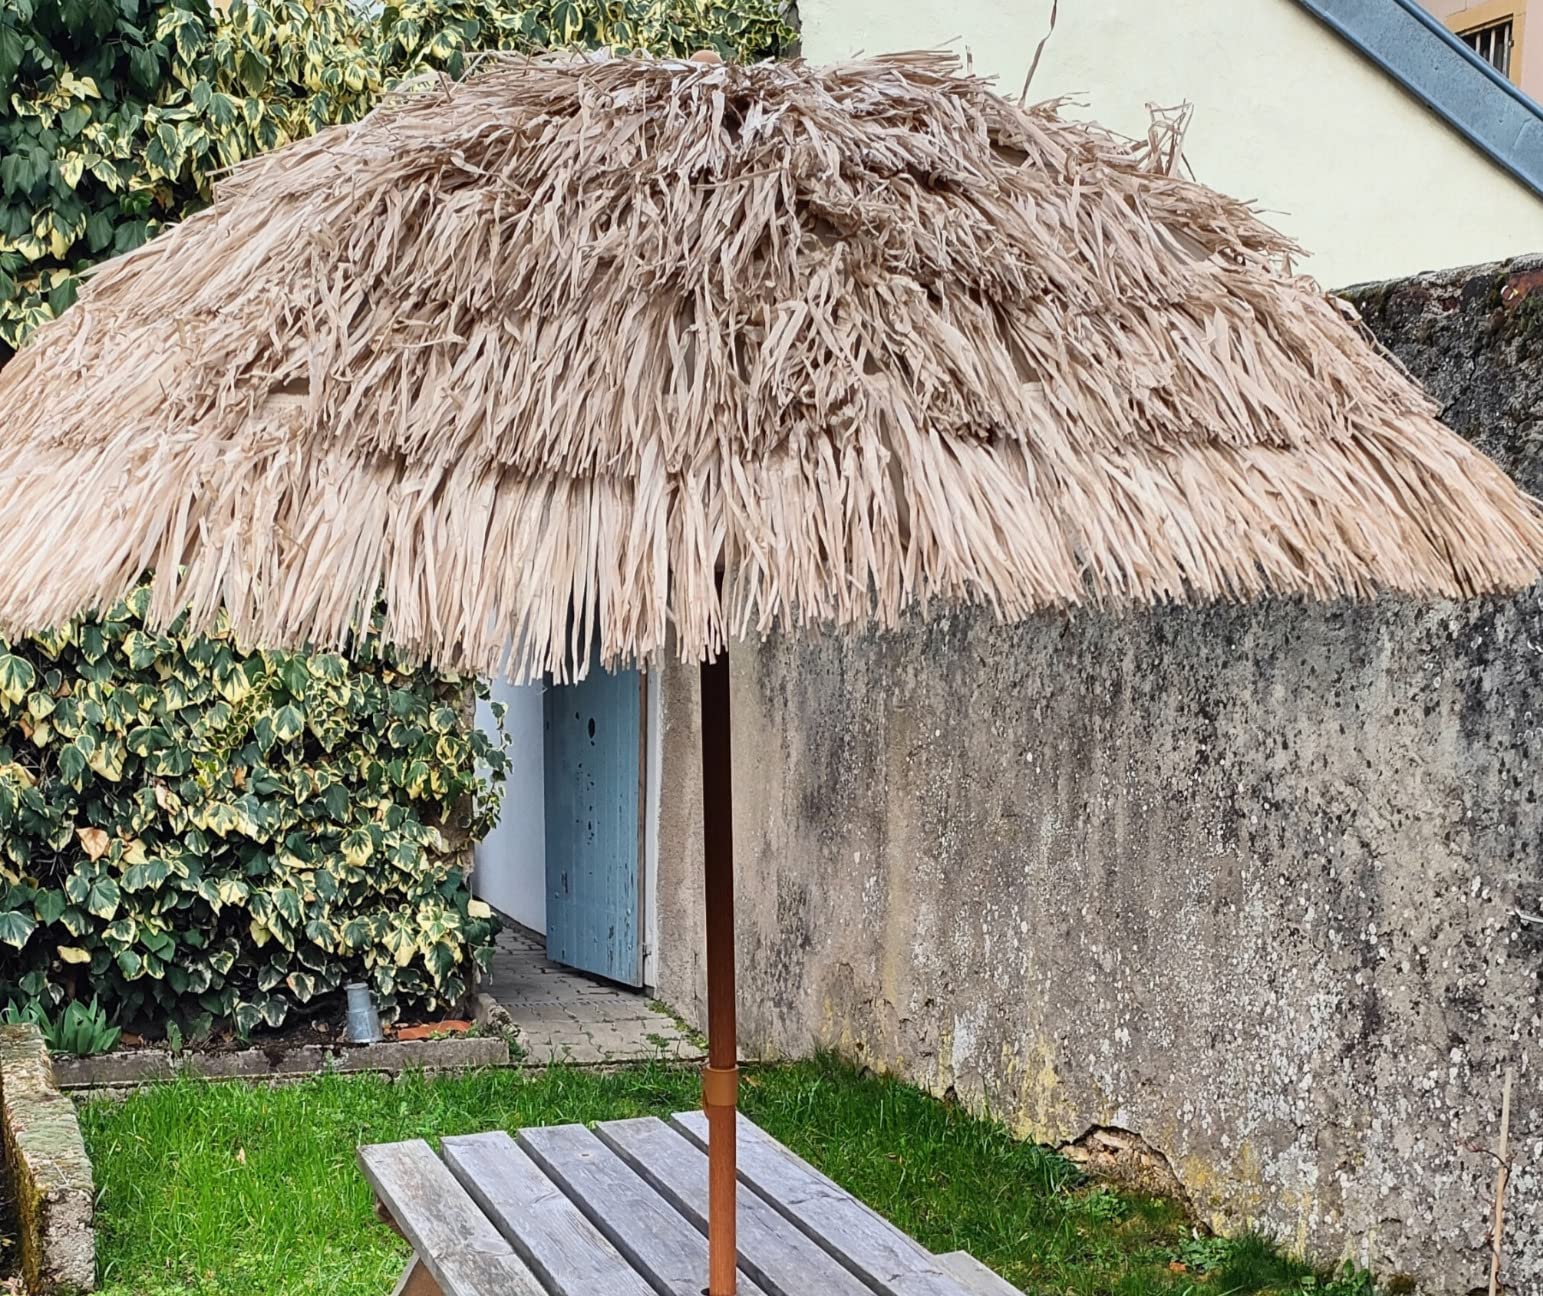 YHPD Parasol Paille Hawaien Exotique Parasol Plage Rond Inclinable